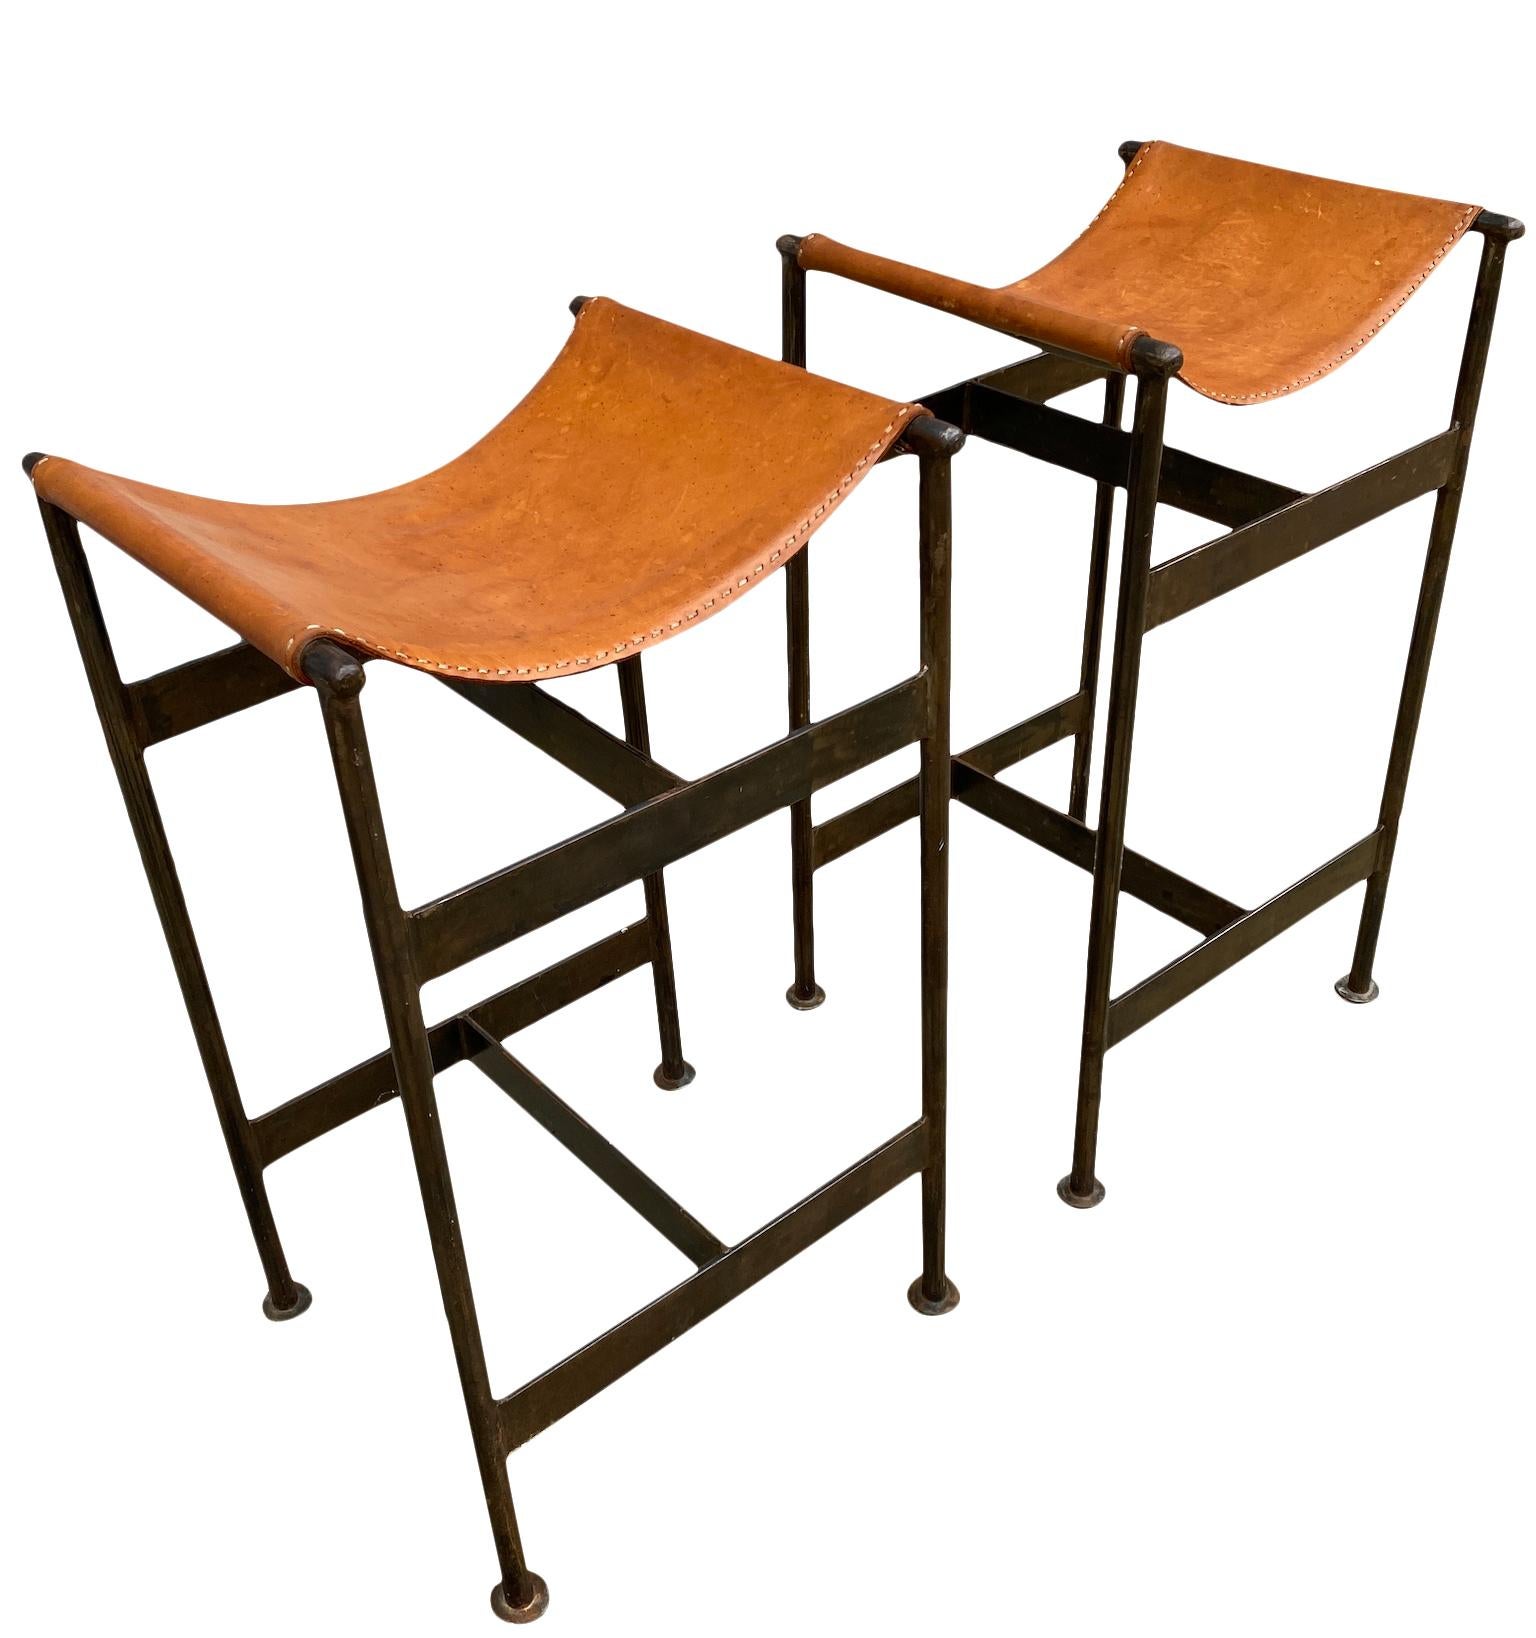 Beautiful midcentury pair of steel and leather Sling Stools style of William Katavolos. Original saddle leather on a steel frame. Leather is in original vintage condition. Steel is raw and shows rust very industrial look. Very comfortable. No